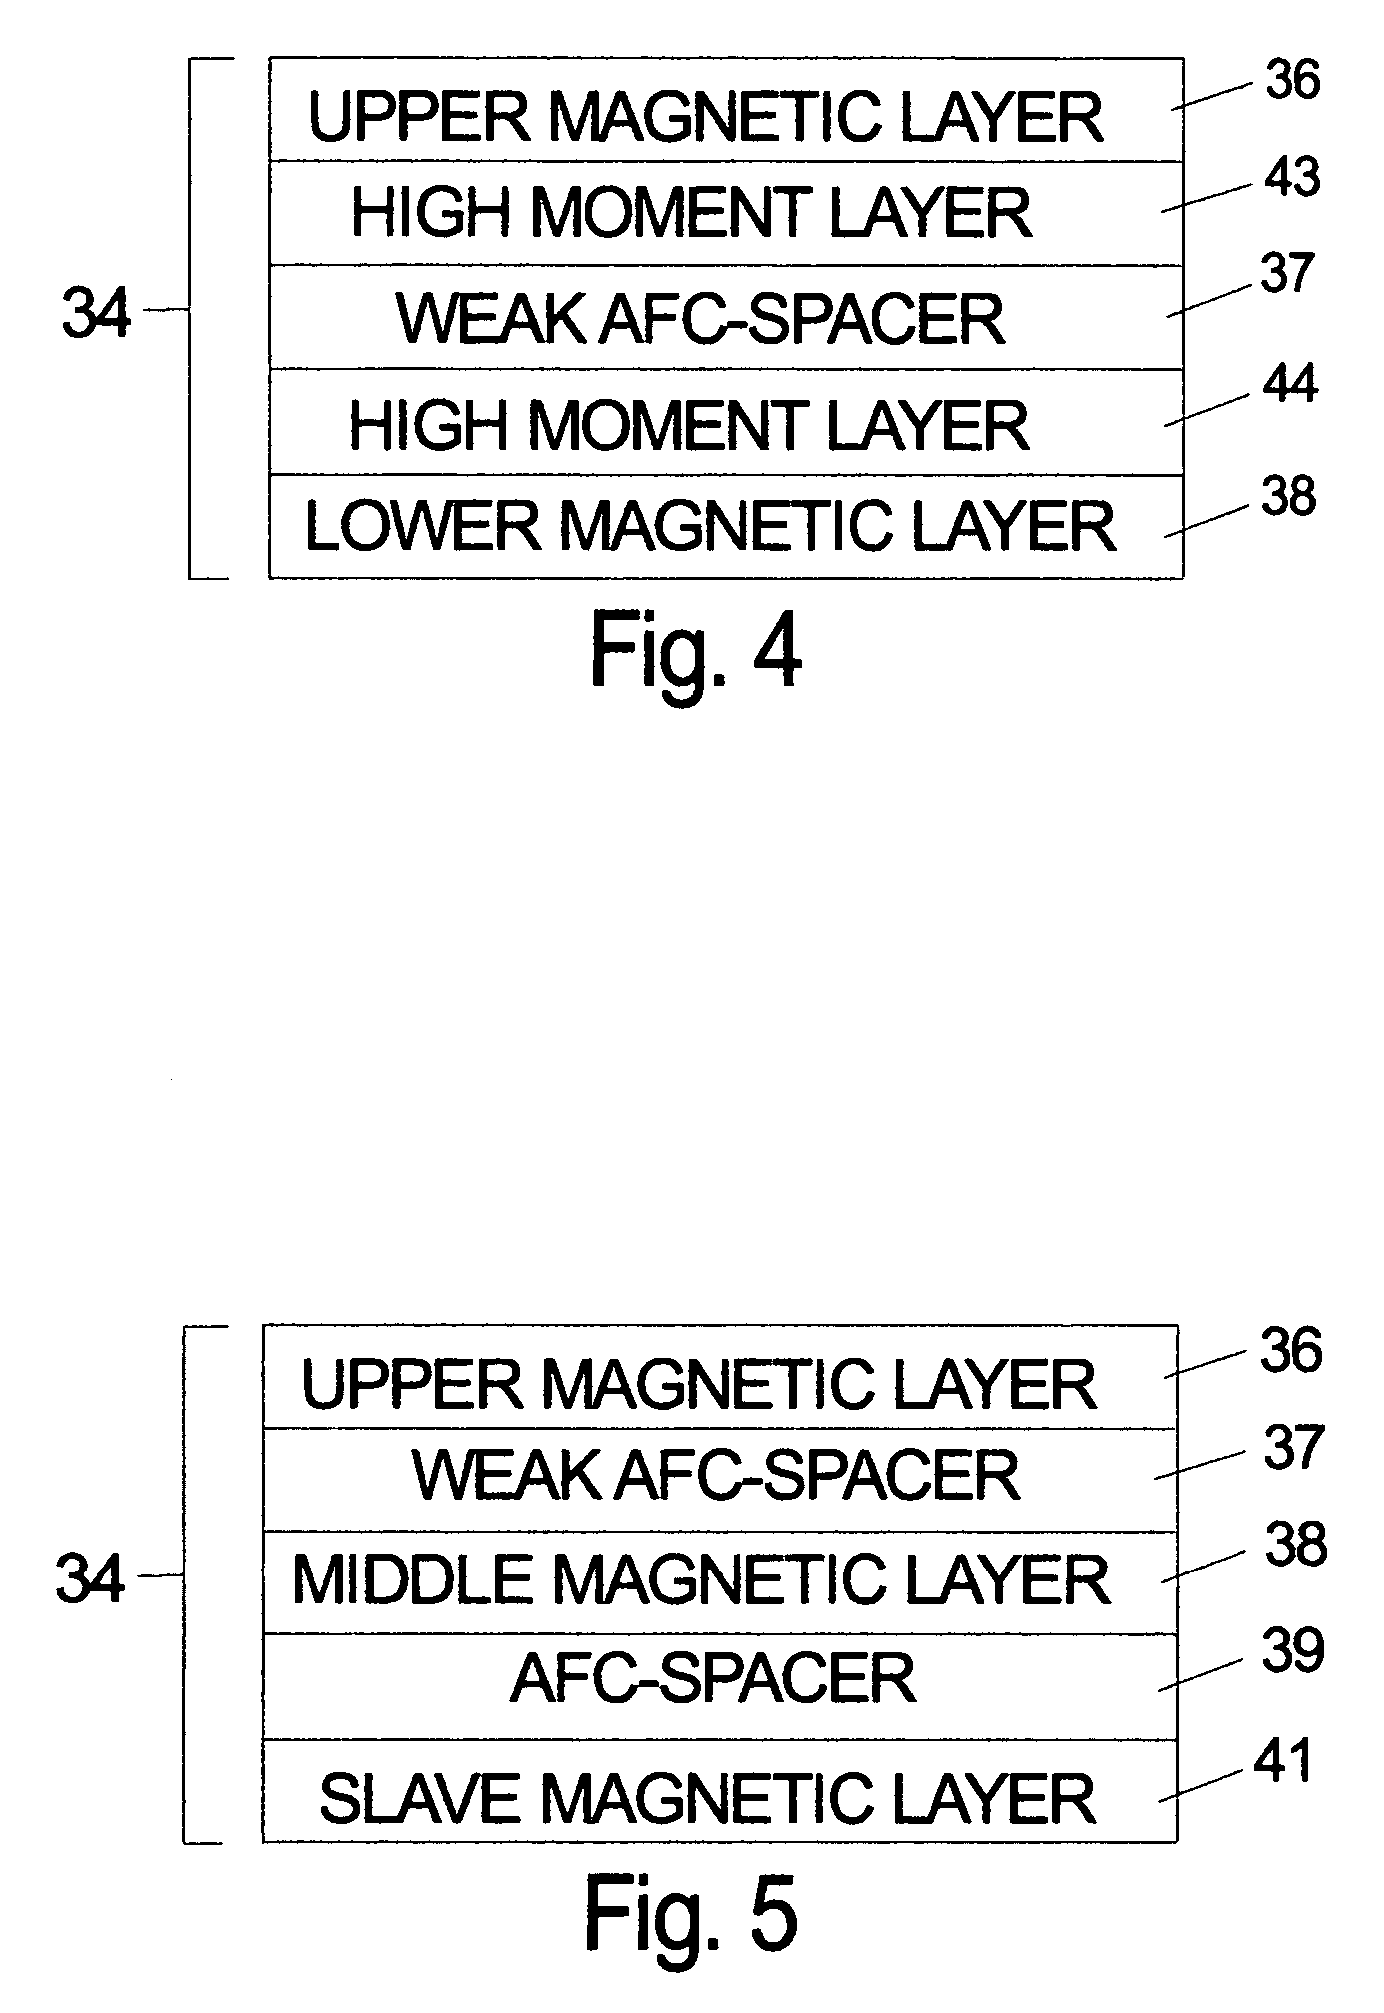 Laminated magnetic thin films with weak antiferromagnetic coupling for perpendicular magnetic recording